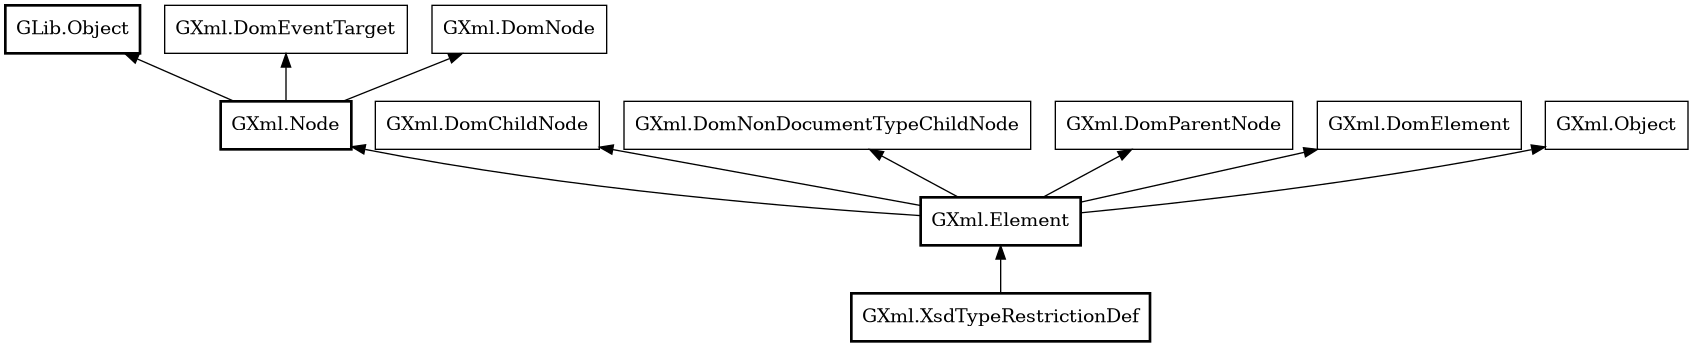 Object hierarchy for XsdTypeRestrictionDef